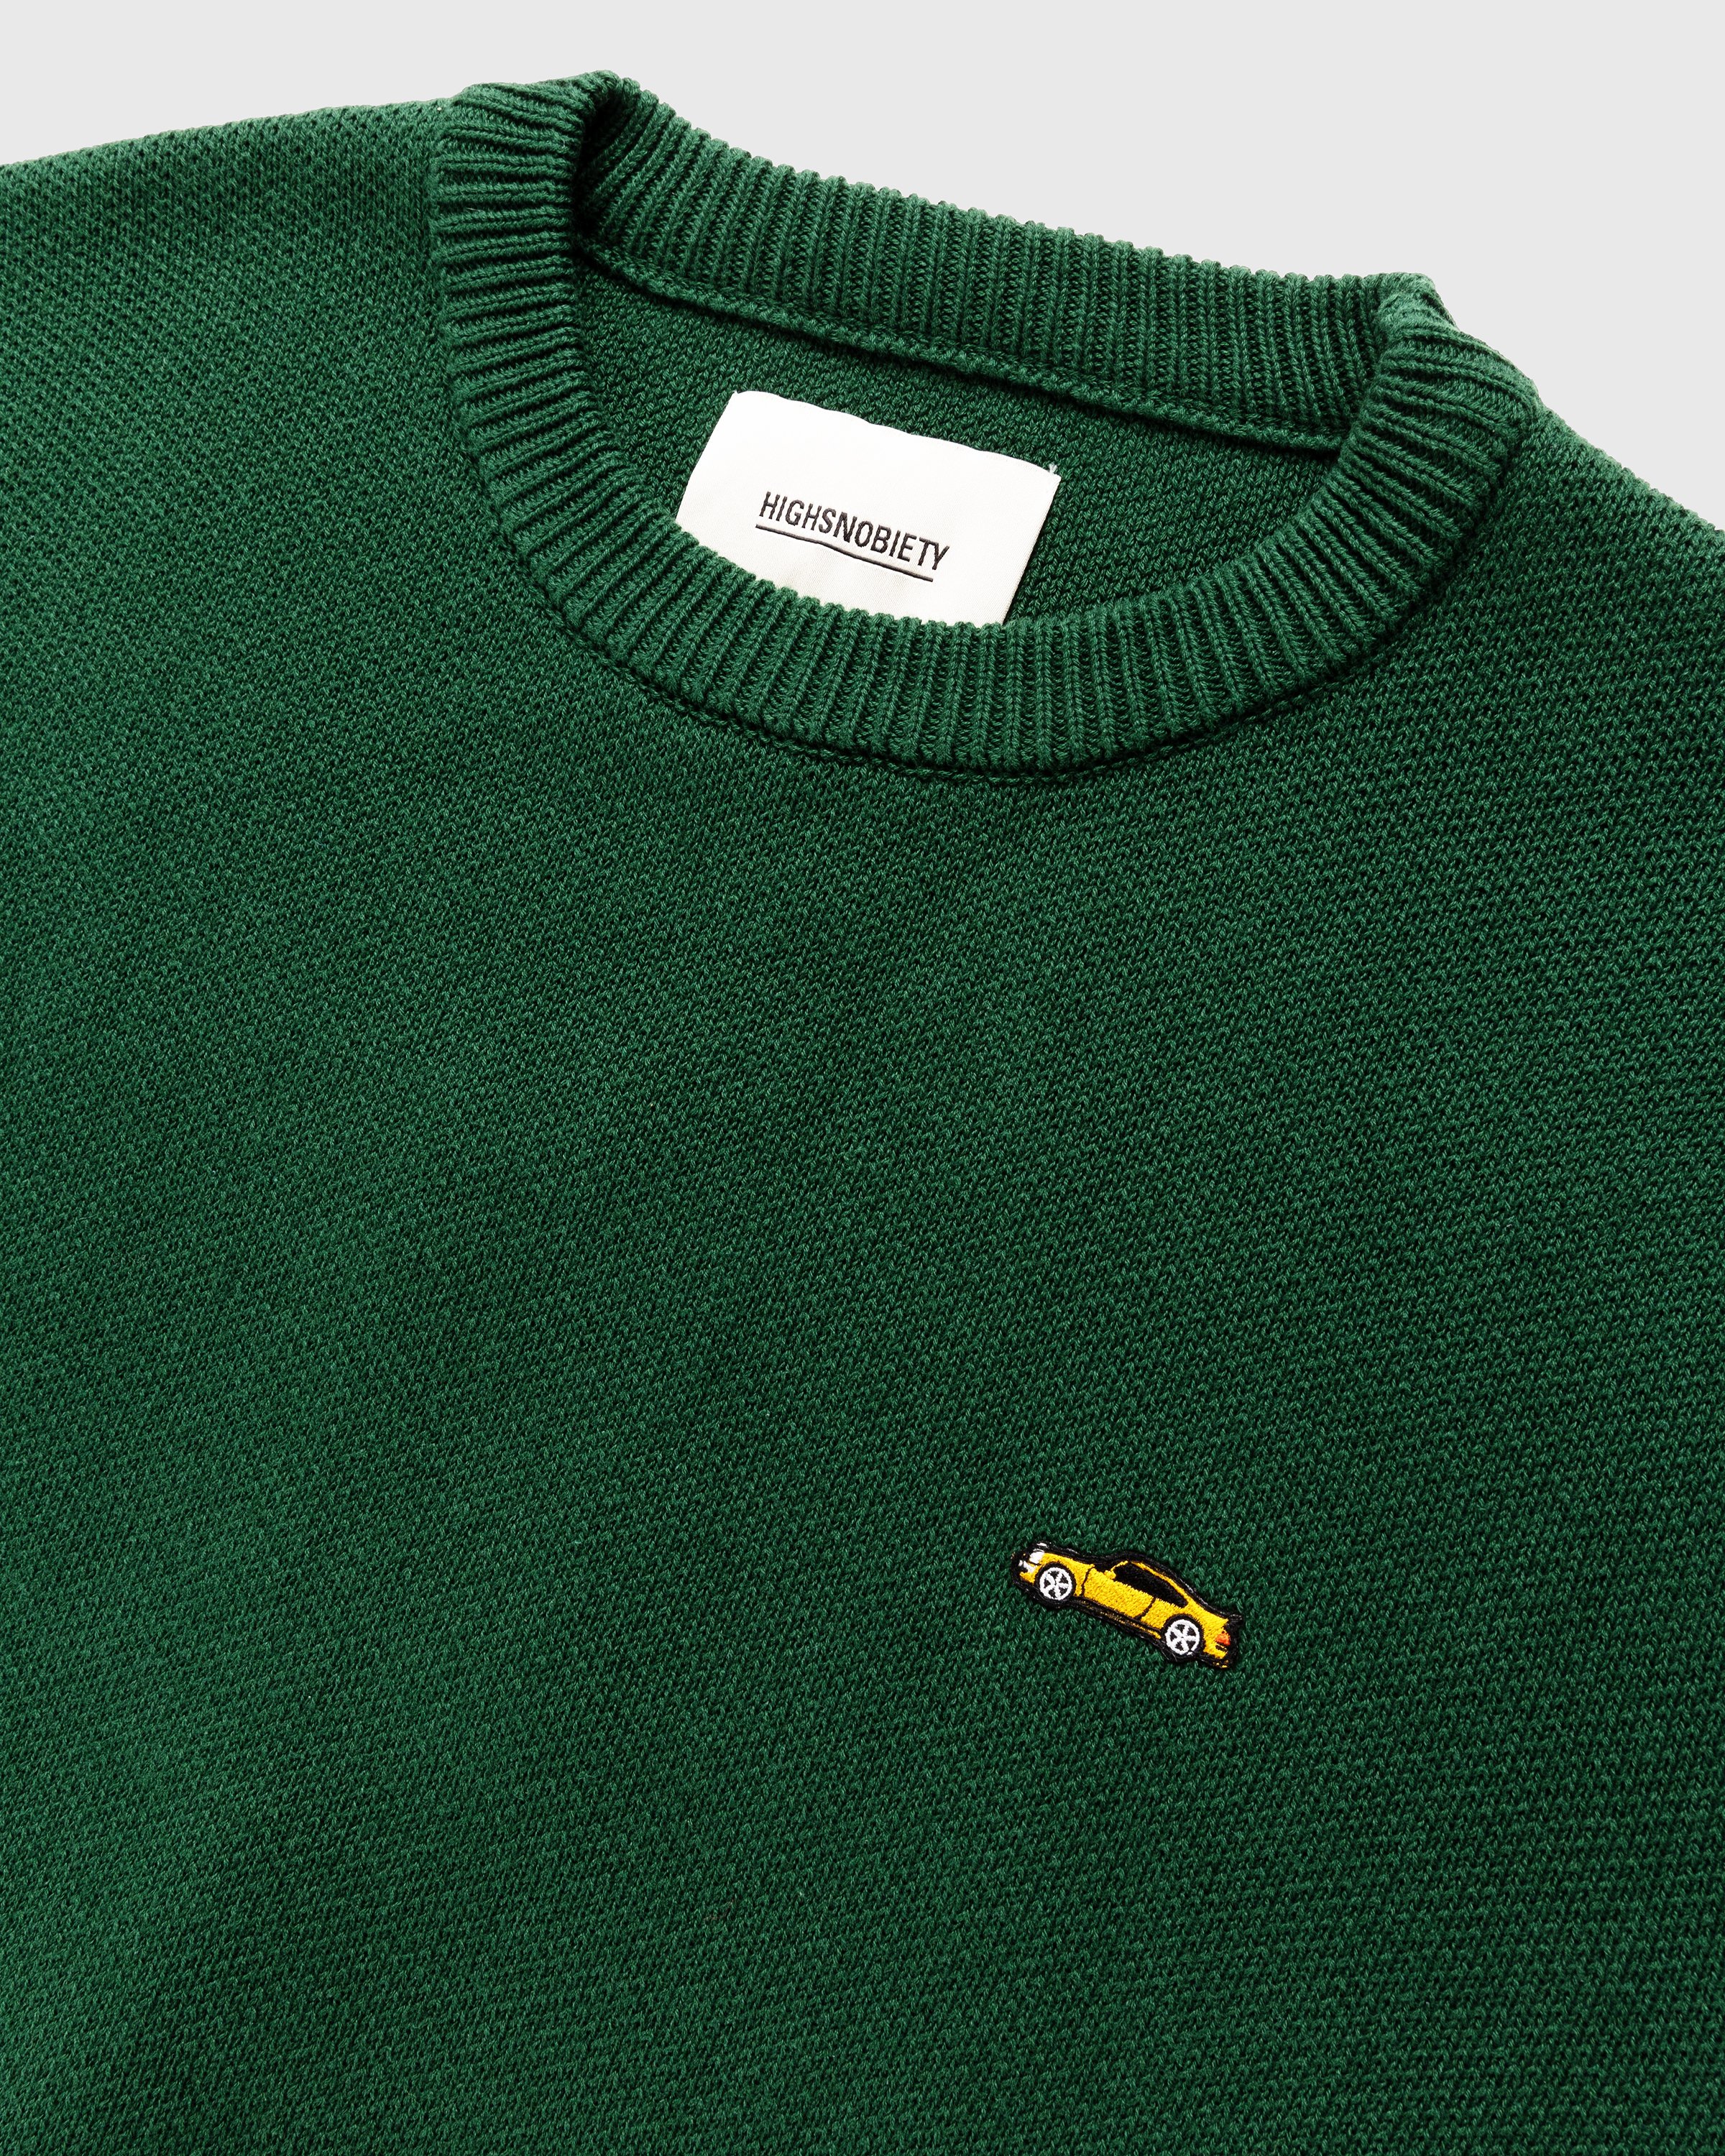 RUF x Highsnobiety - Knitted Crewneck Sweater Green - Clothing - Green - Image 5